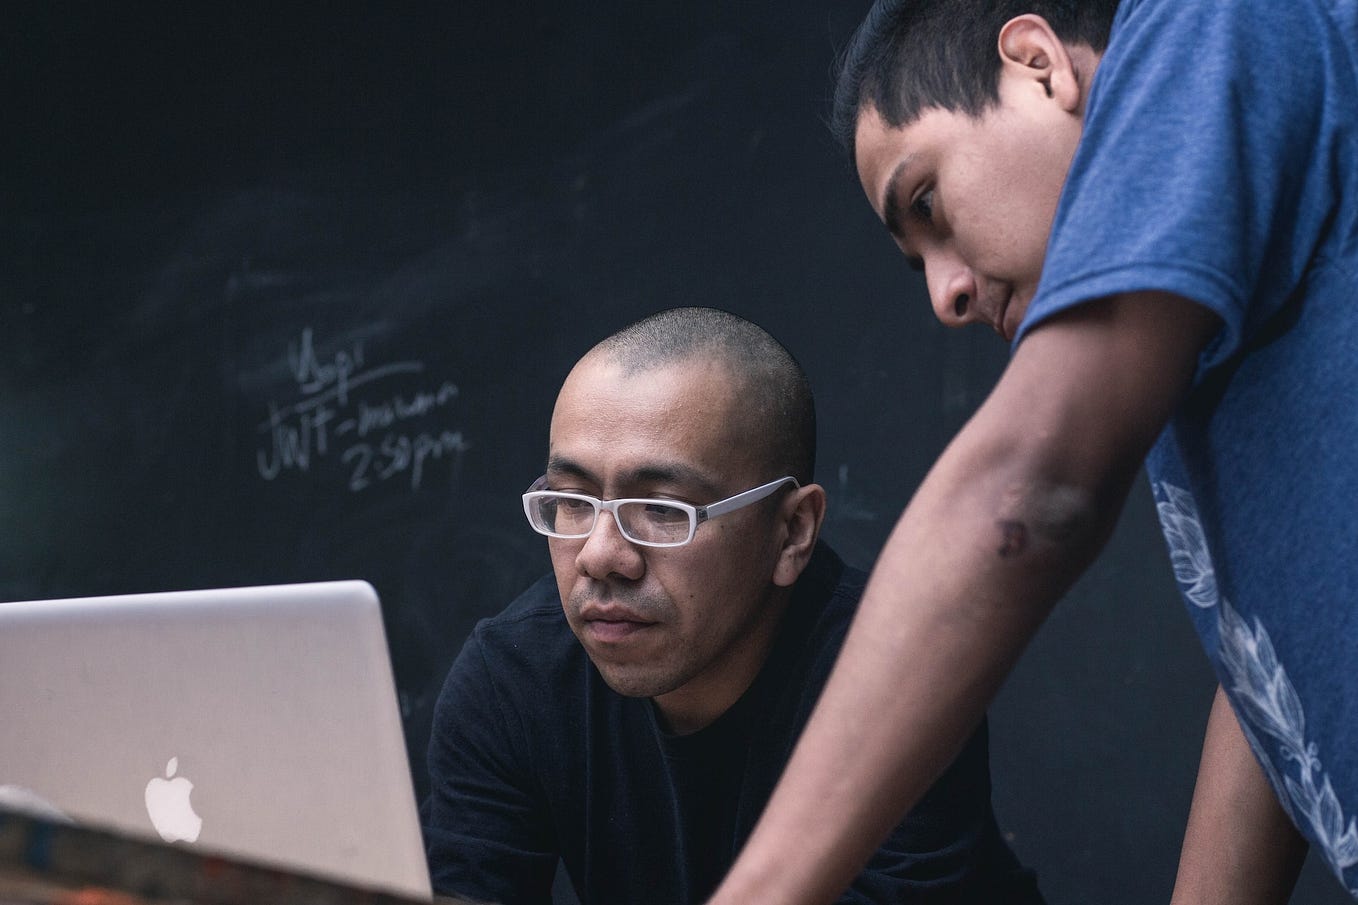 Two men in front of a blackboard looking at a laptop